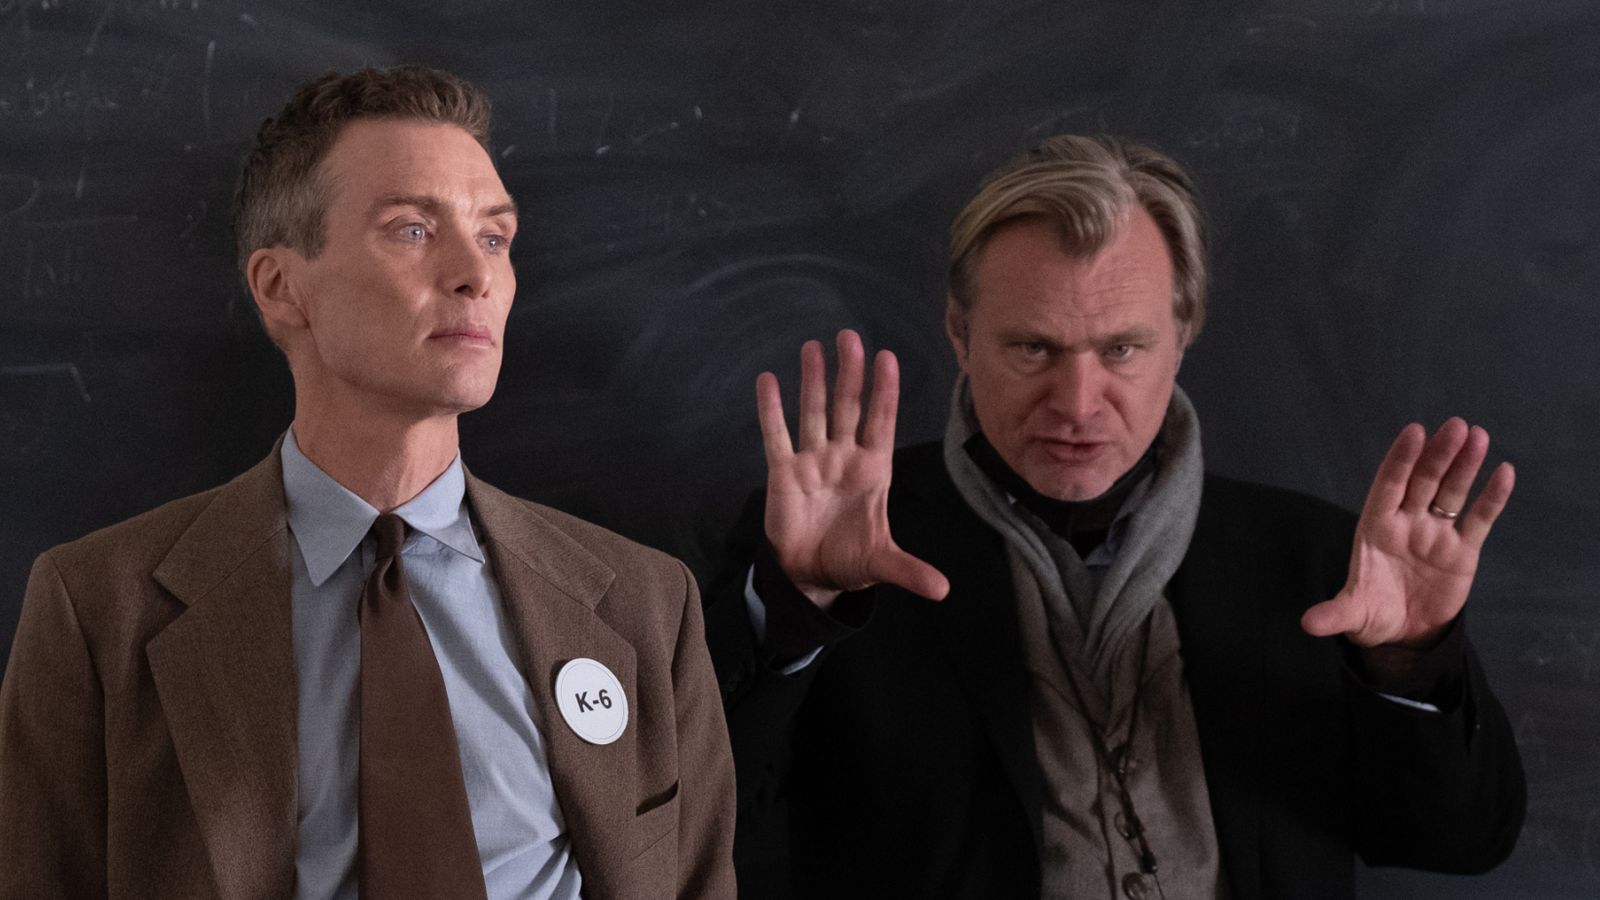 'The danger never goes away': Christopher Nolan didn't intend for Oppenheimer movie to be so timely